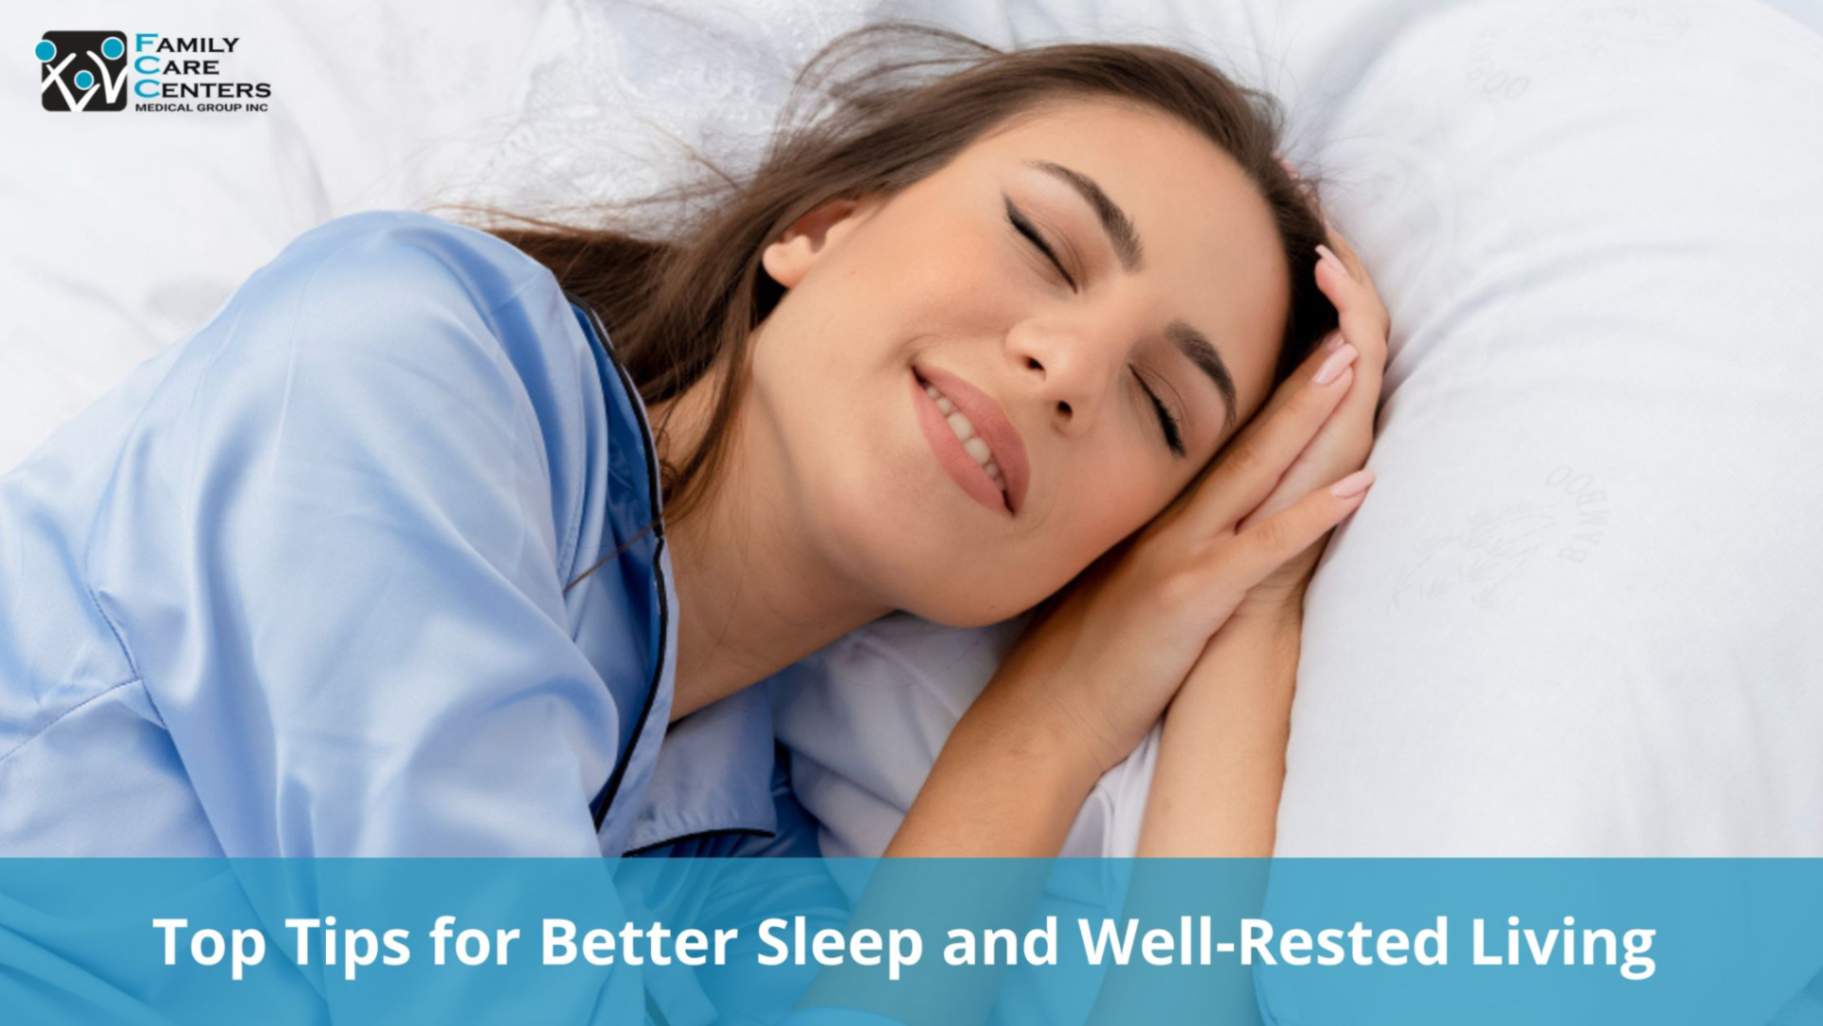 Top Tips for Better Sleep and Well-Rested Living